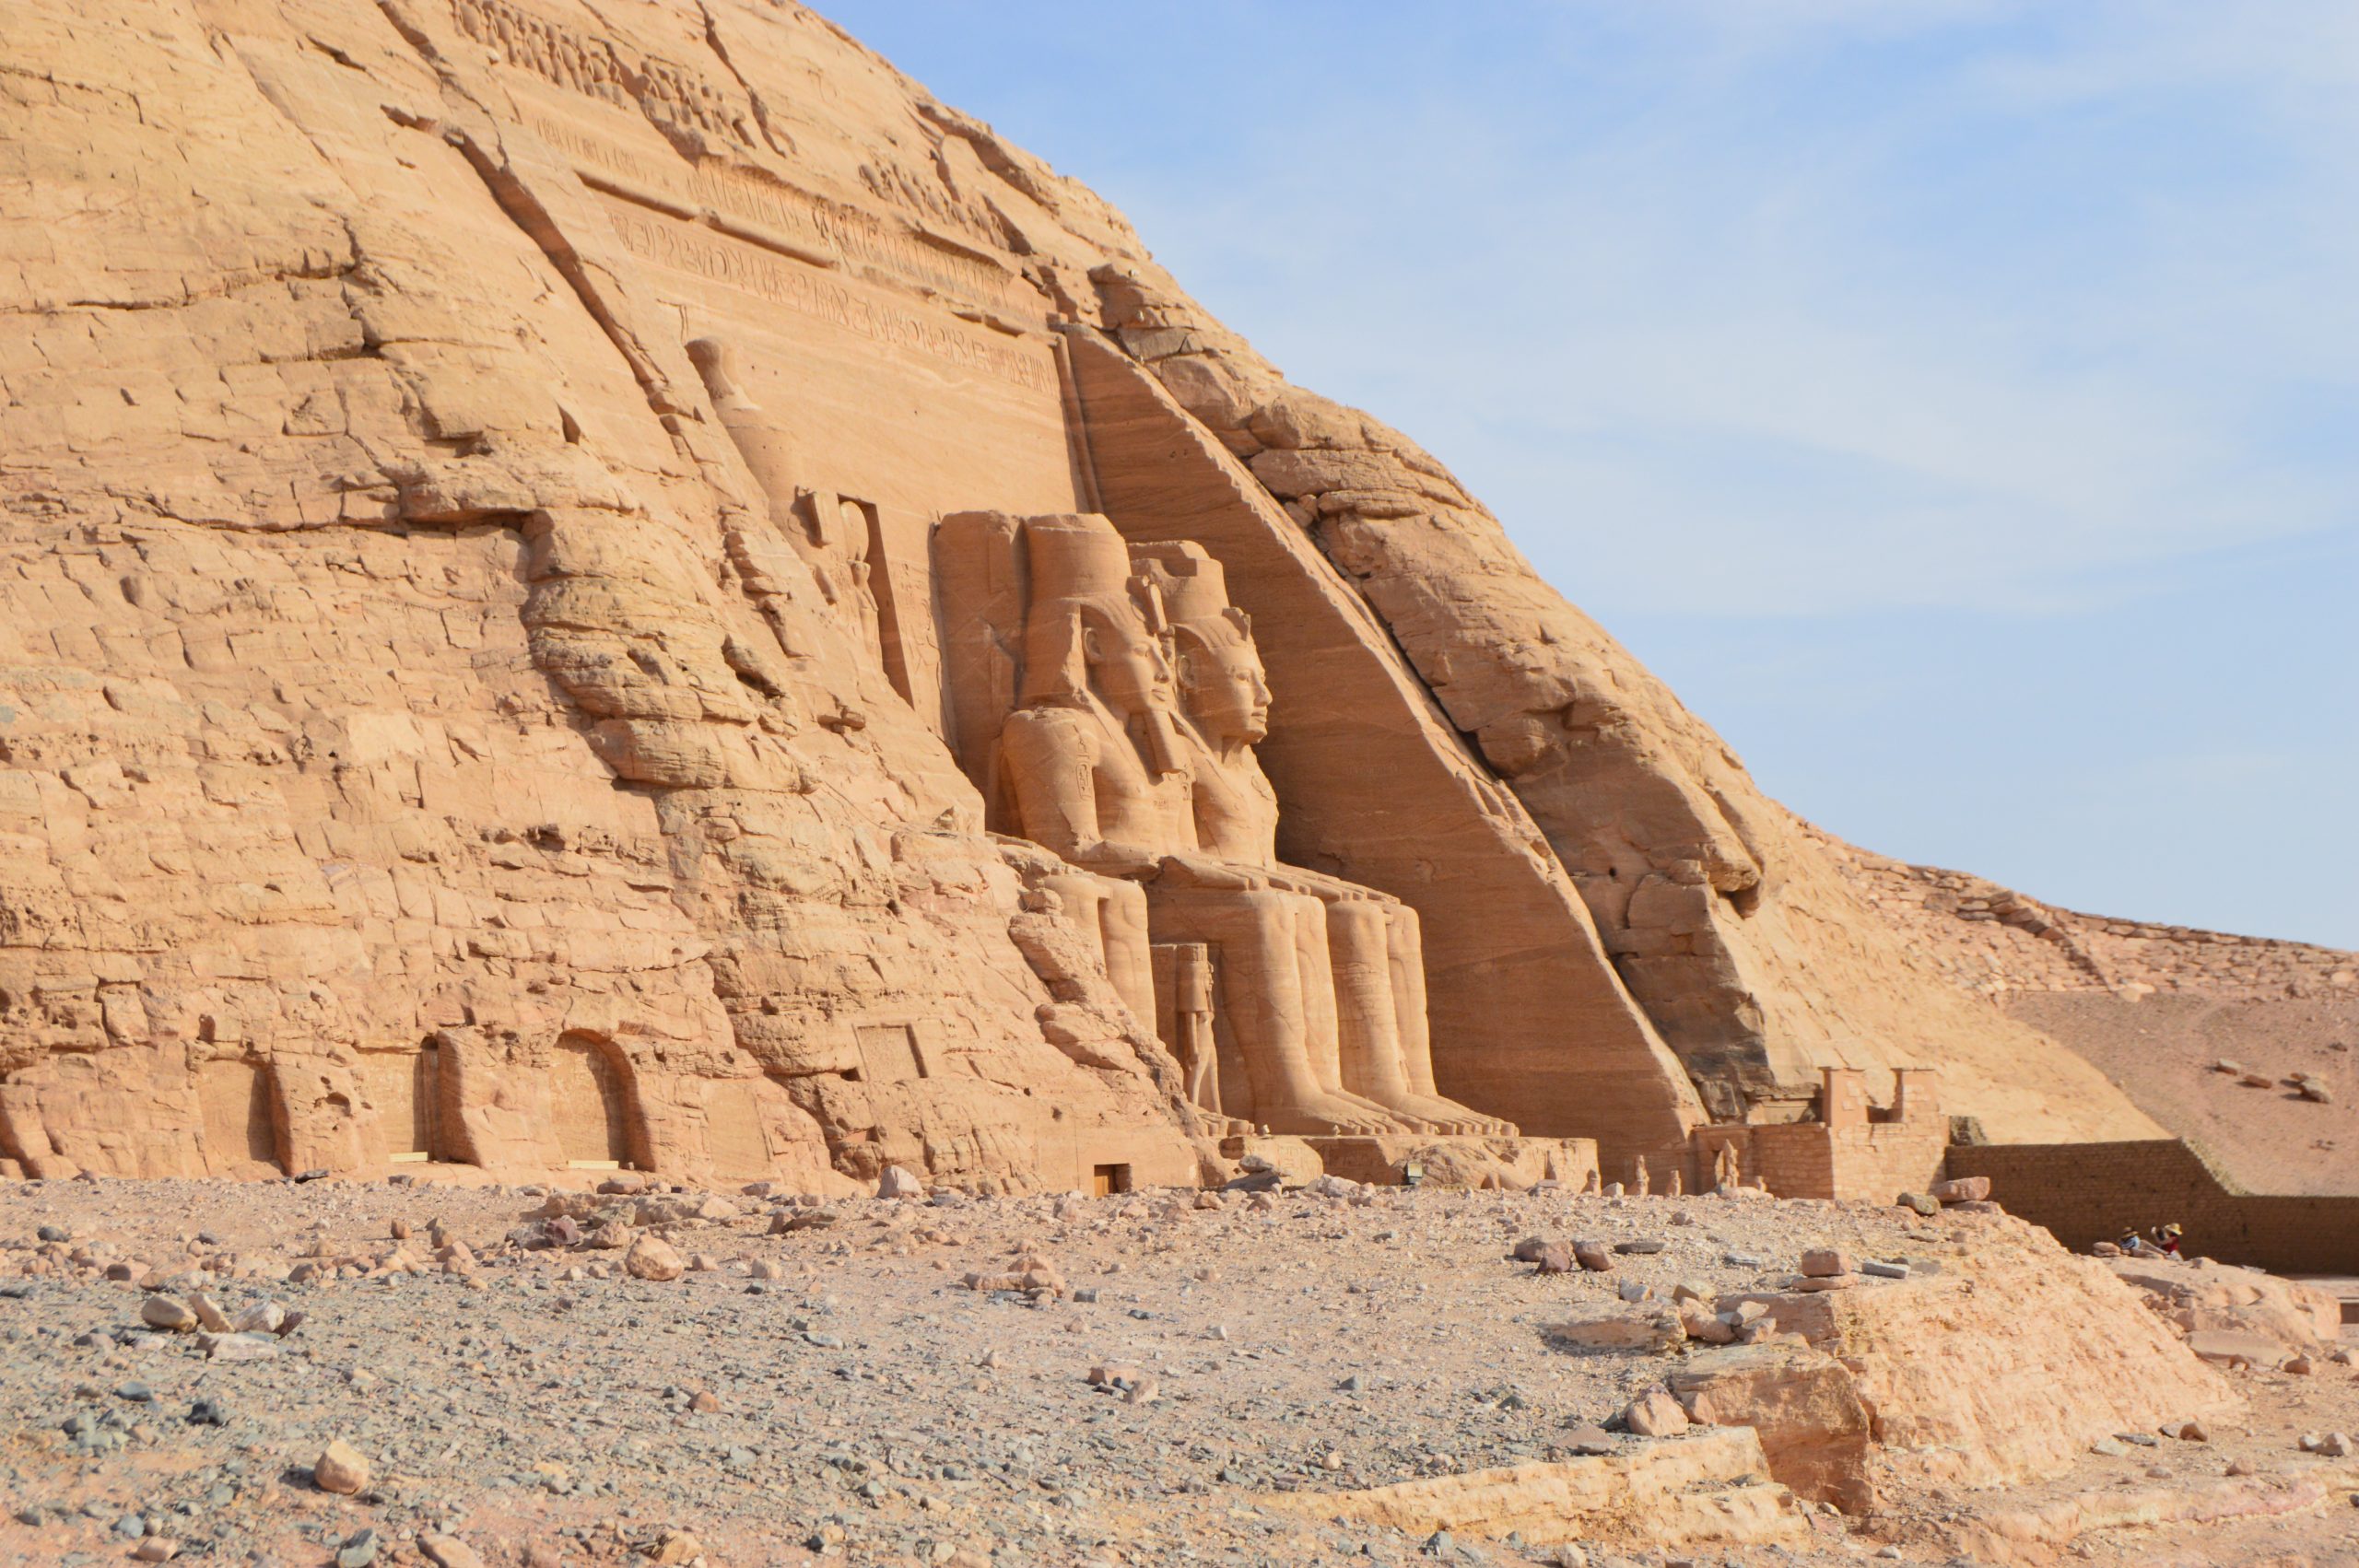 An old historical Abu Simbel Temple of Ramesses II in Egypt